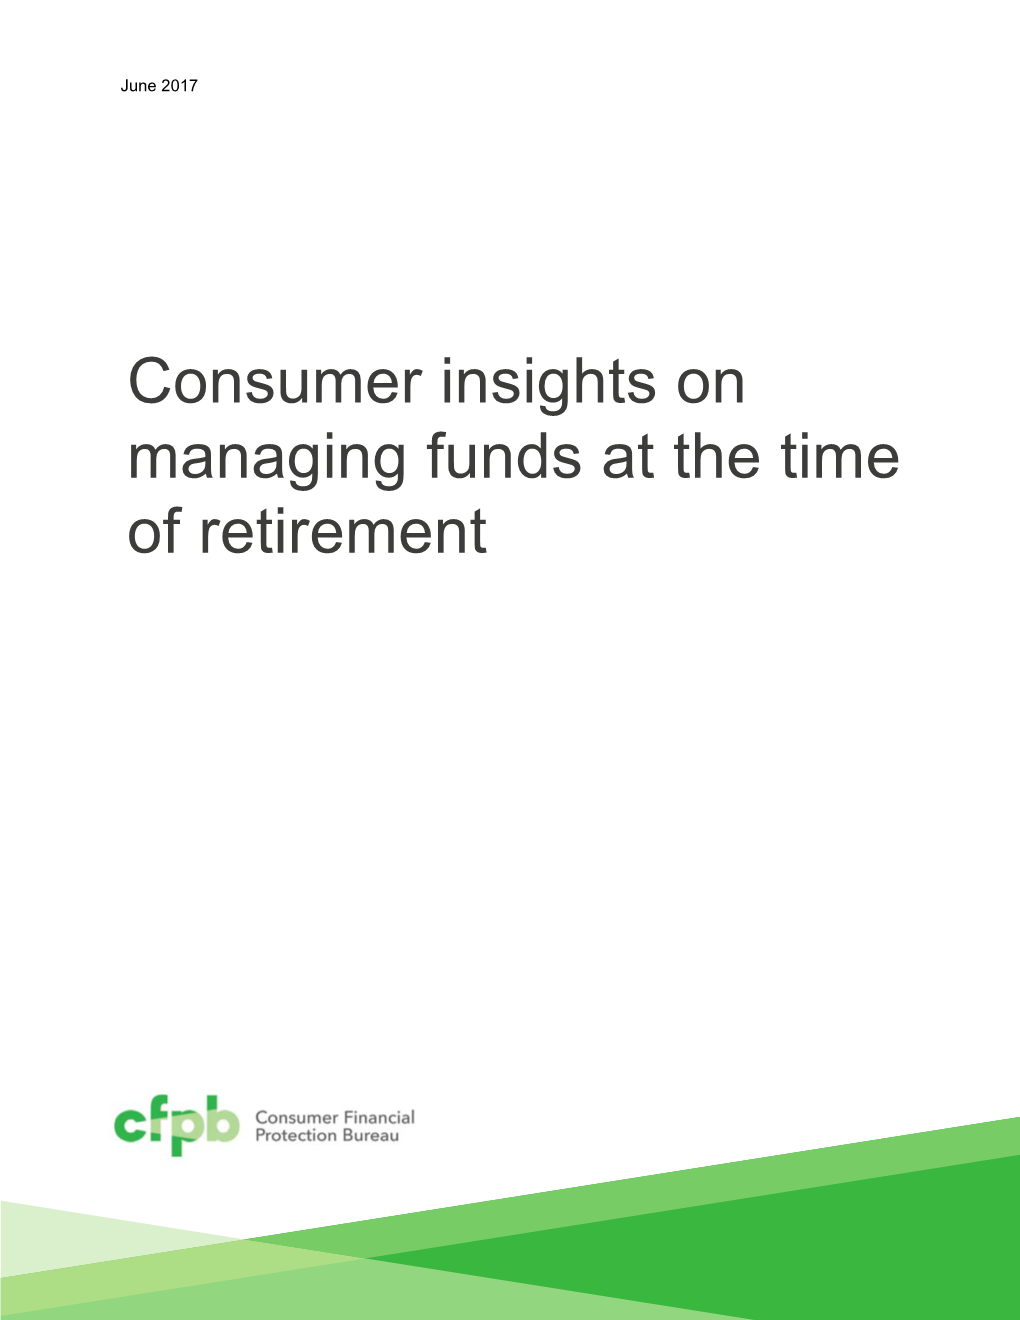 Consumer Insights on Managing Funds at the Time of Retirement